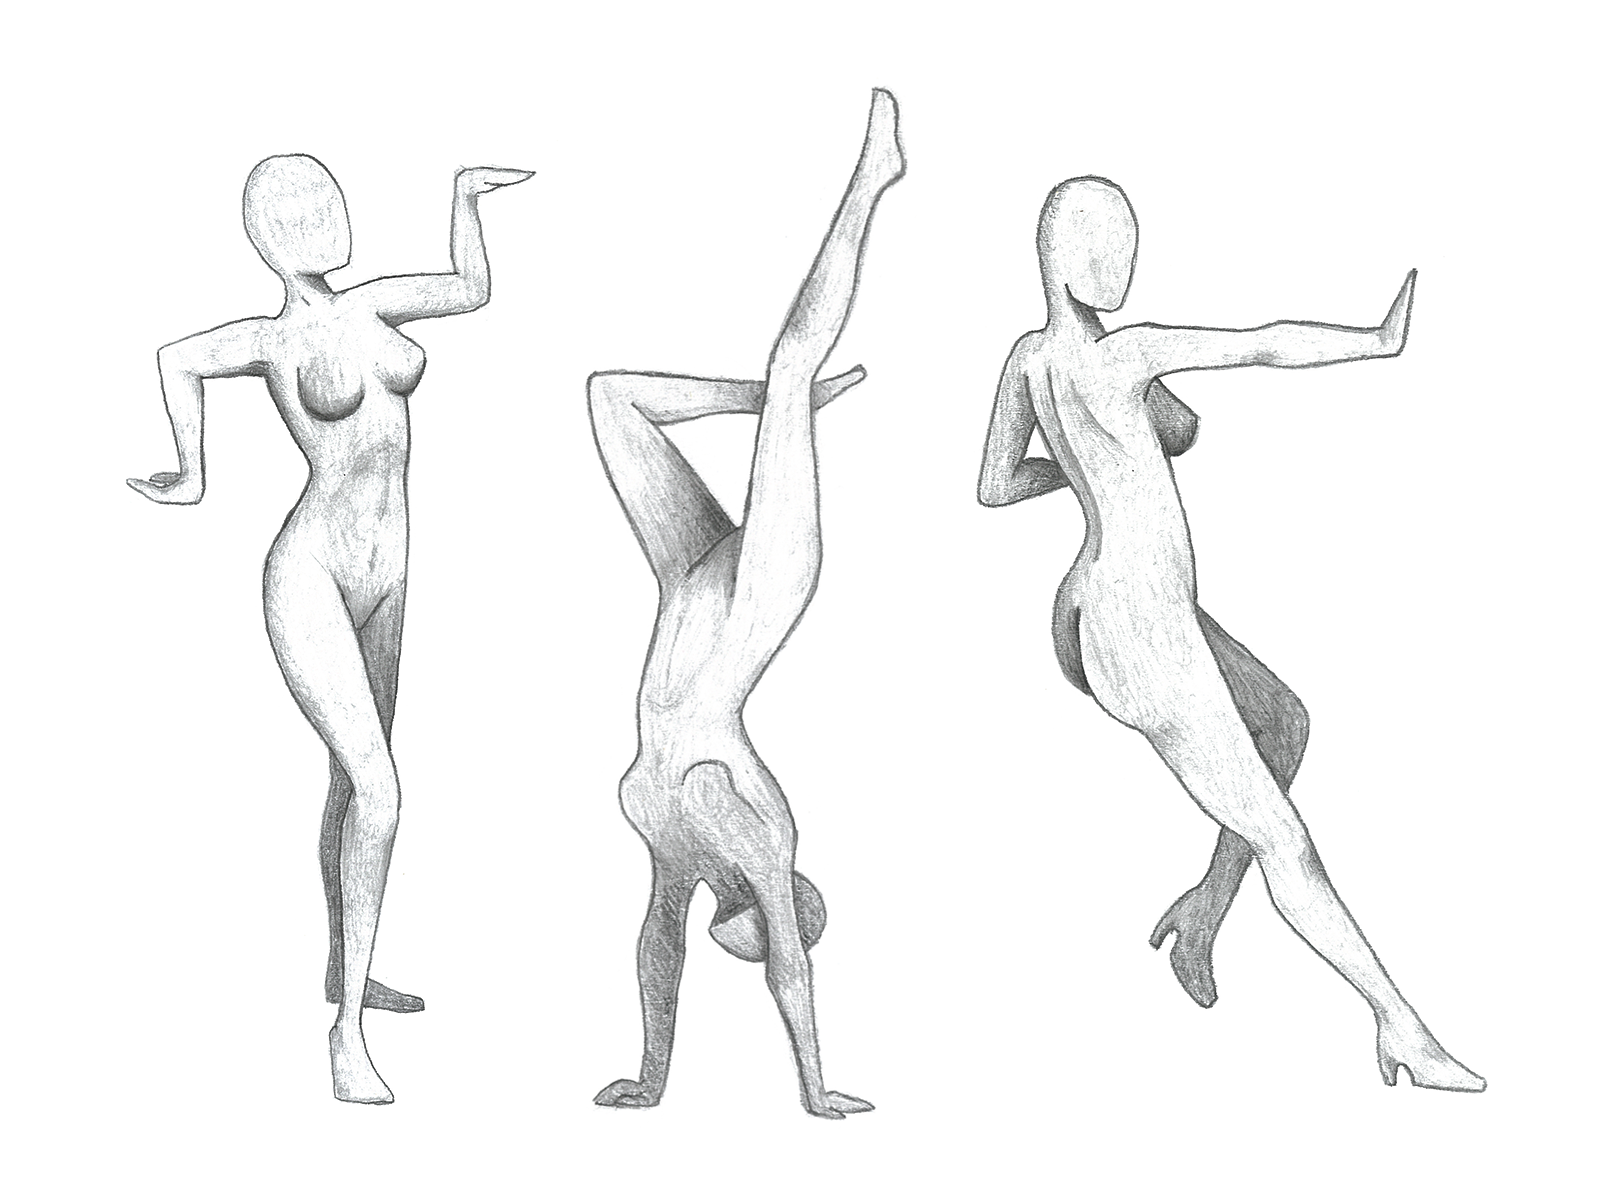 Poses Study by Tamara (Tammy) Stantic on Dribbble